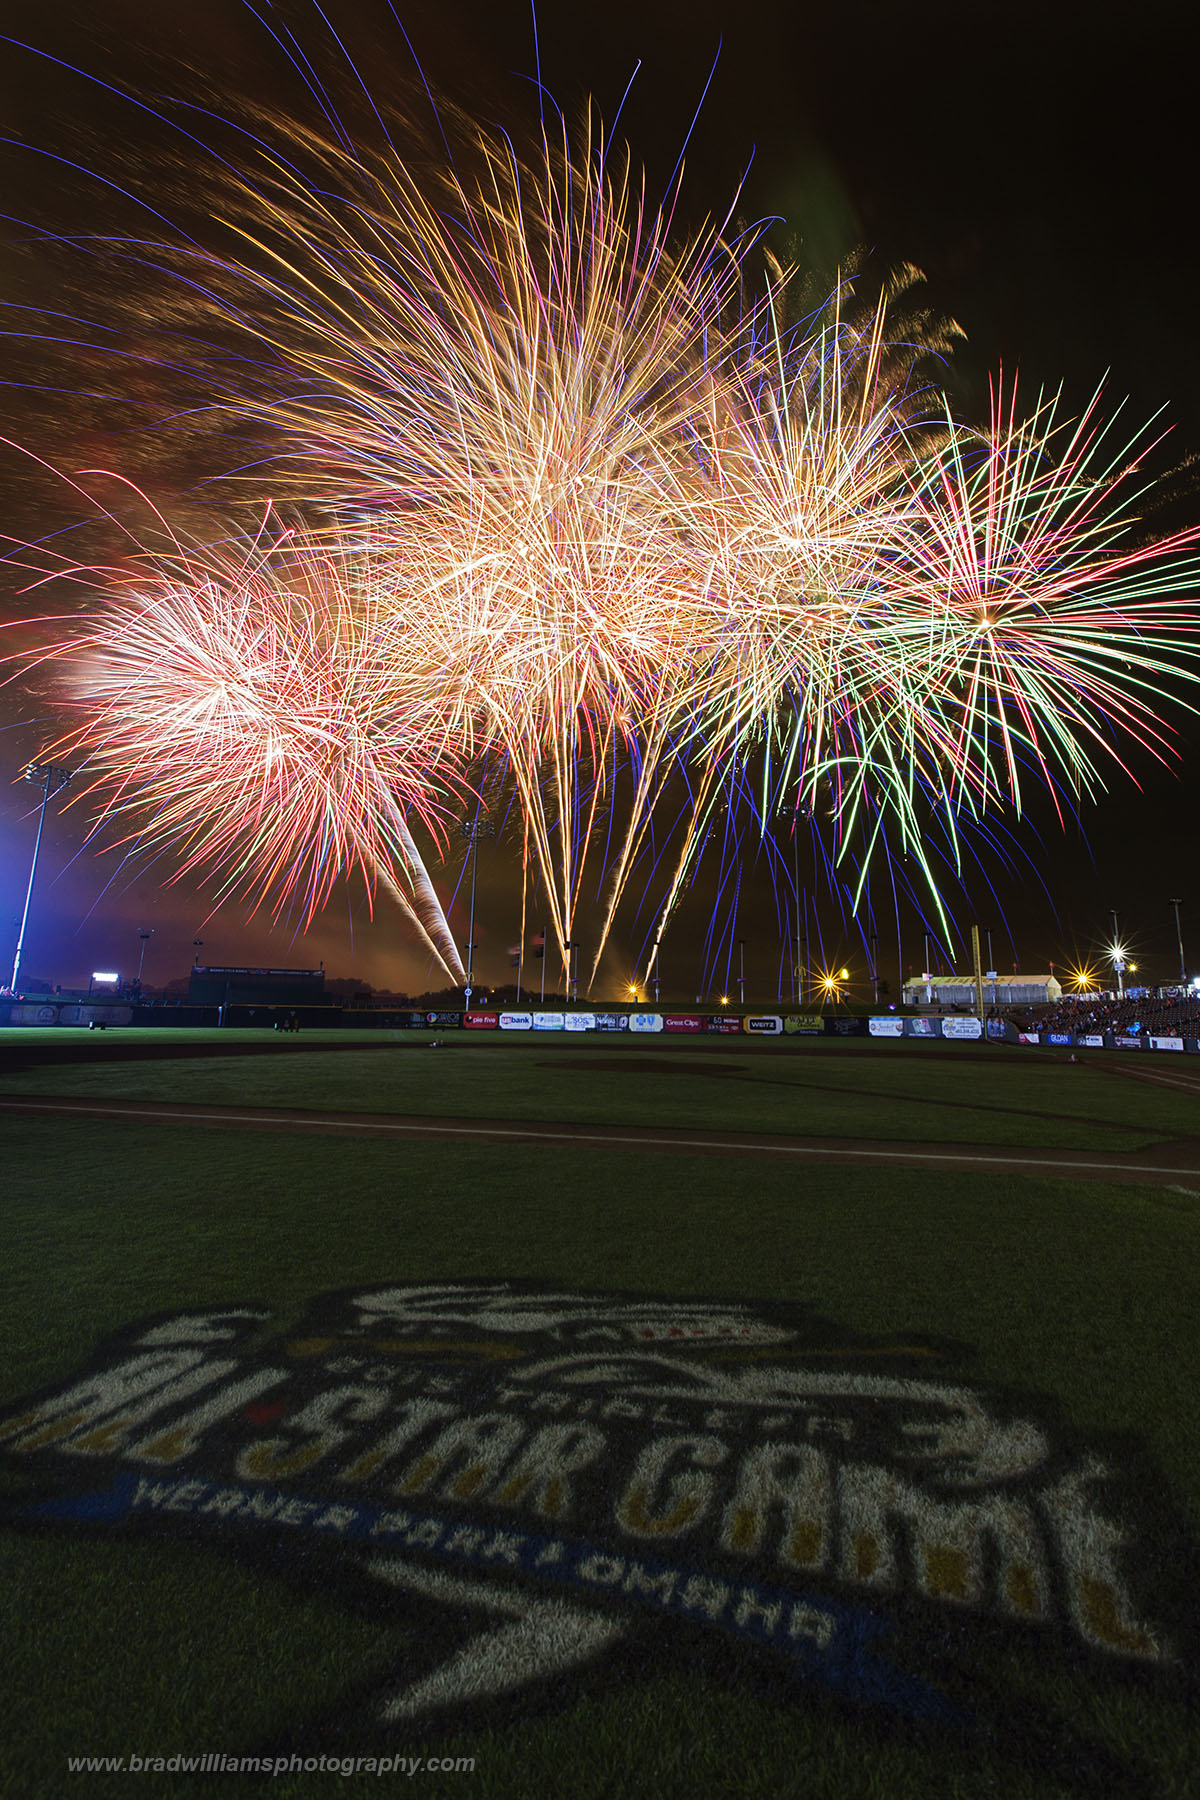 Extra fireworks were brought in for the 2015 MiLB All-Star game at Werner Park in Papillion (Omaha), Nebraska.